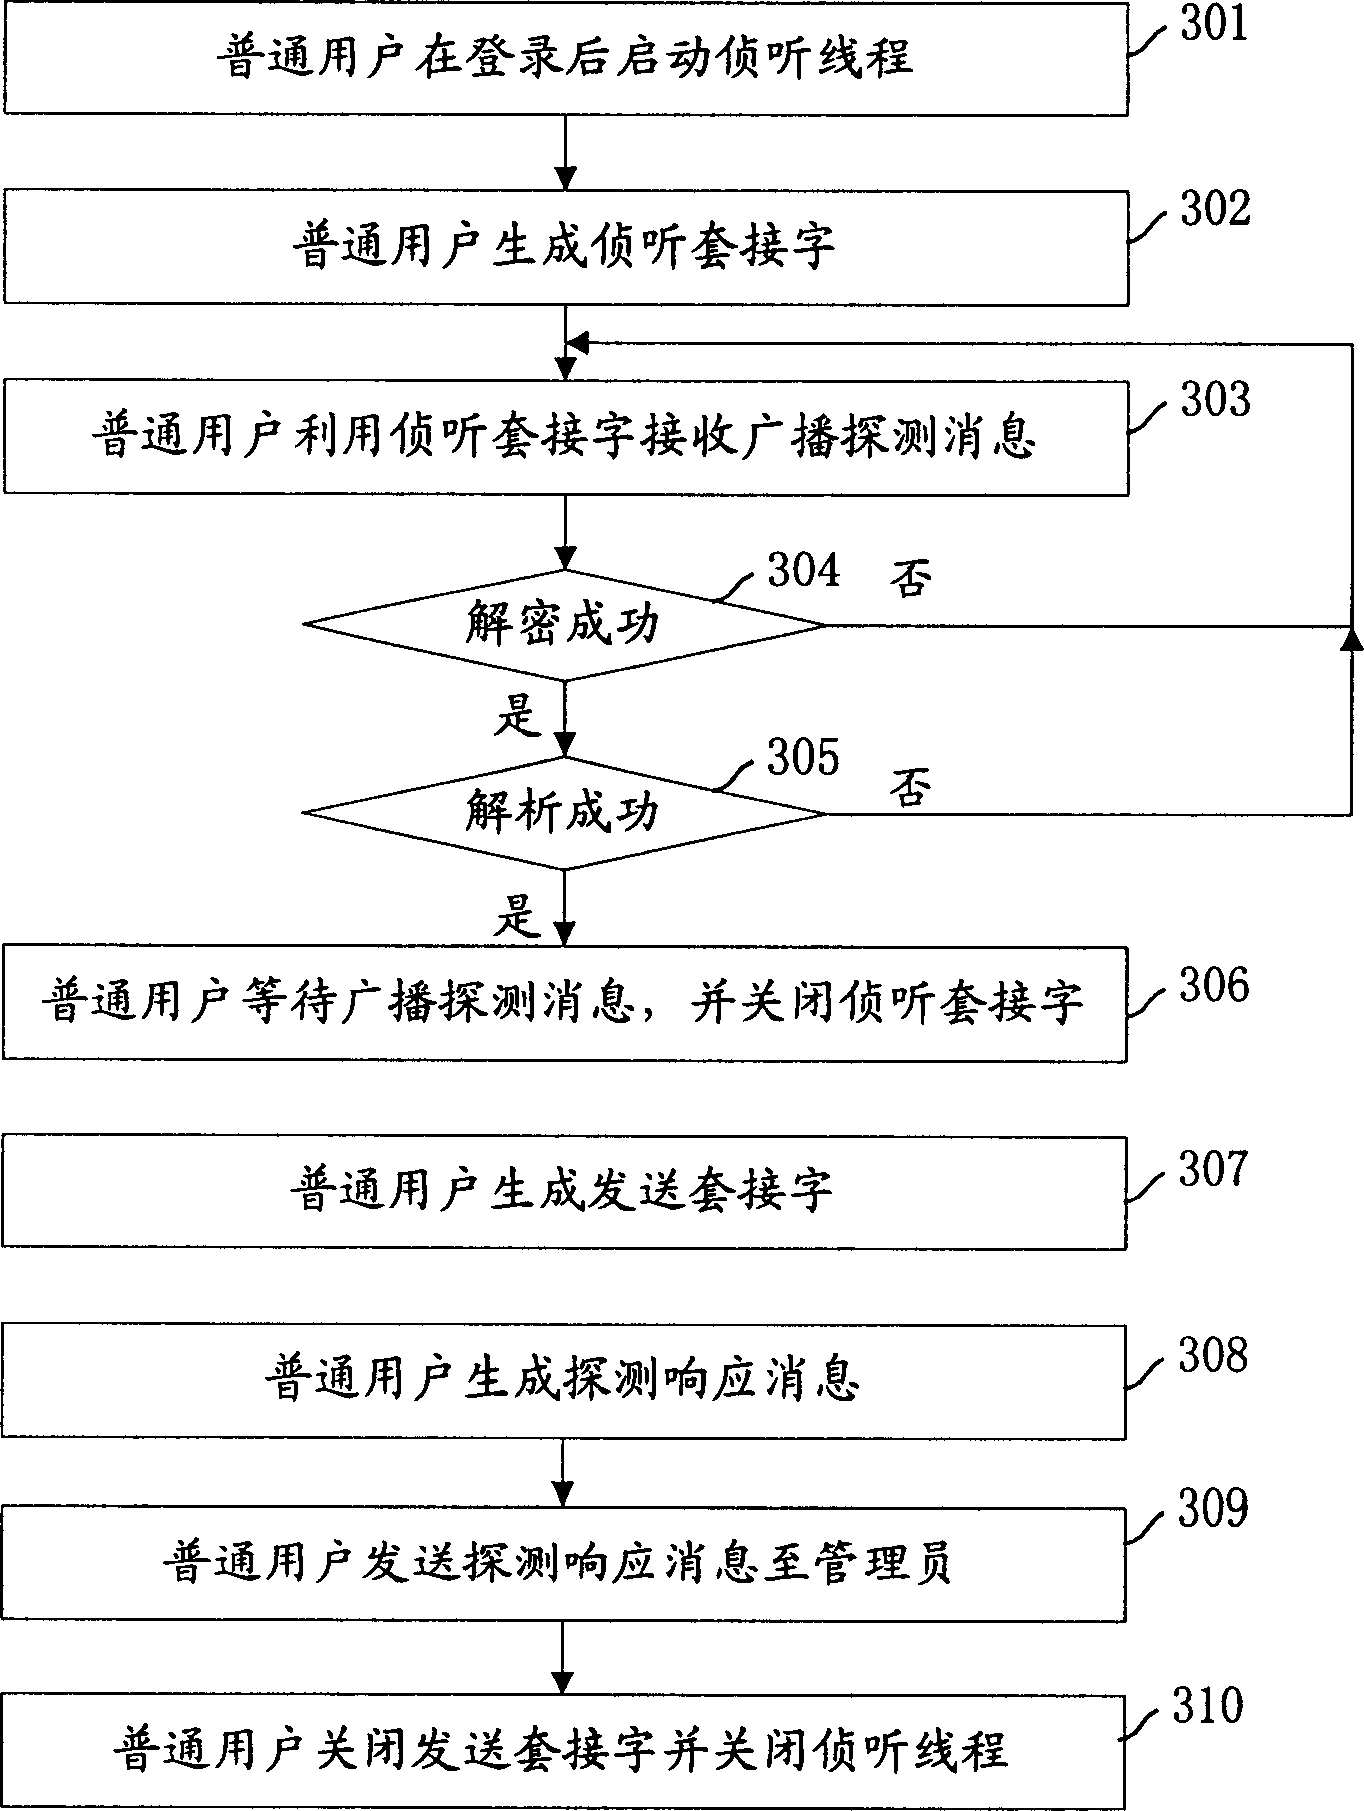 Method for searching instantaneous communication user in LAN